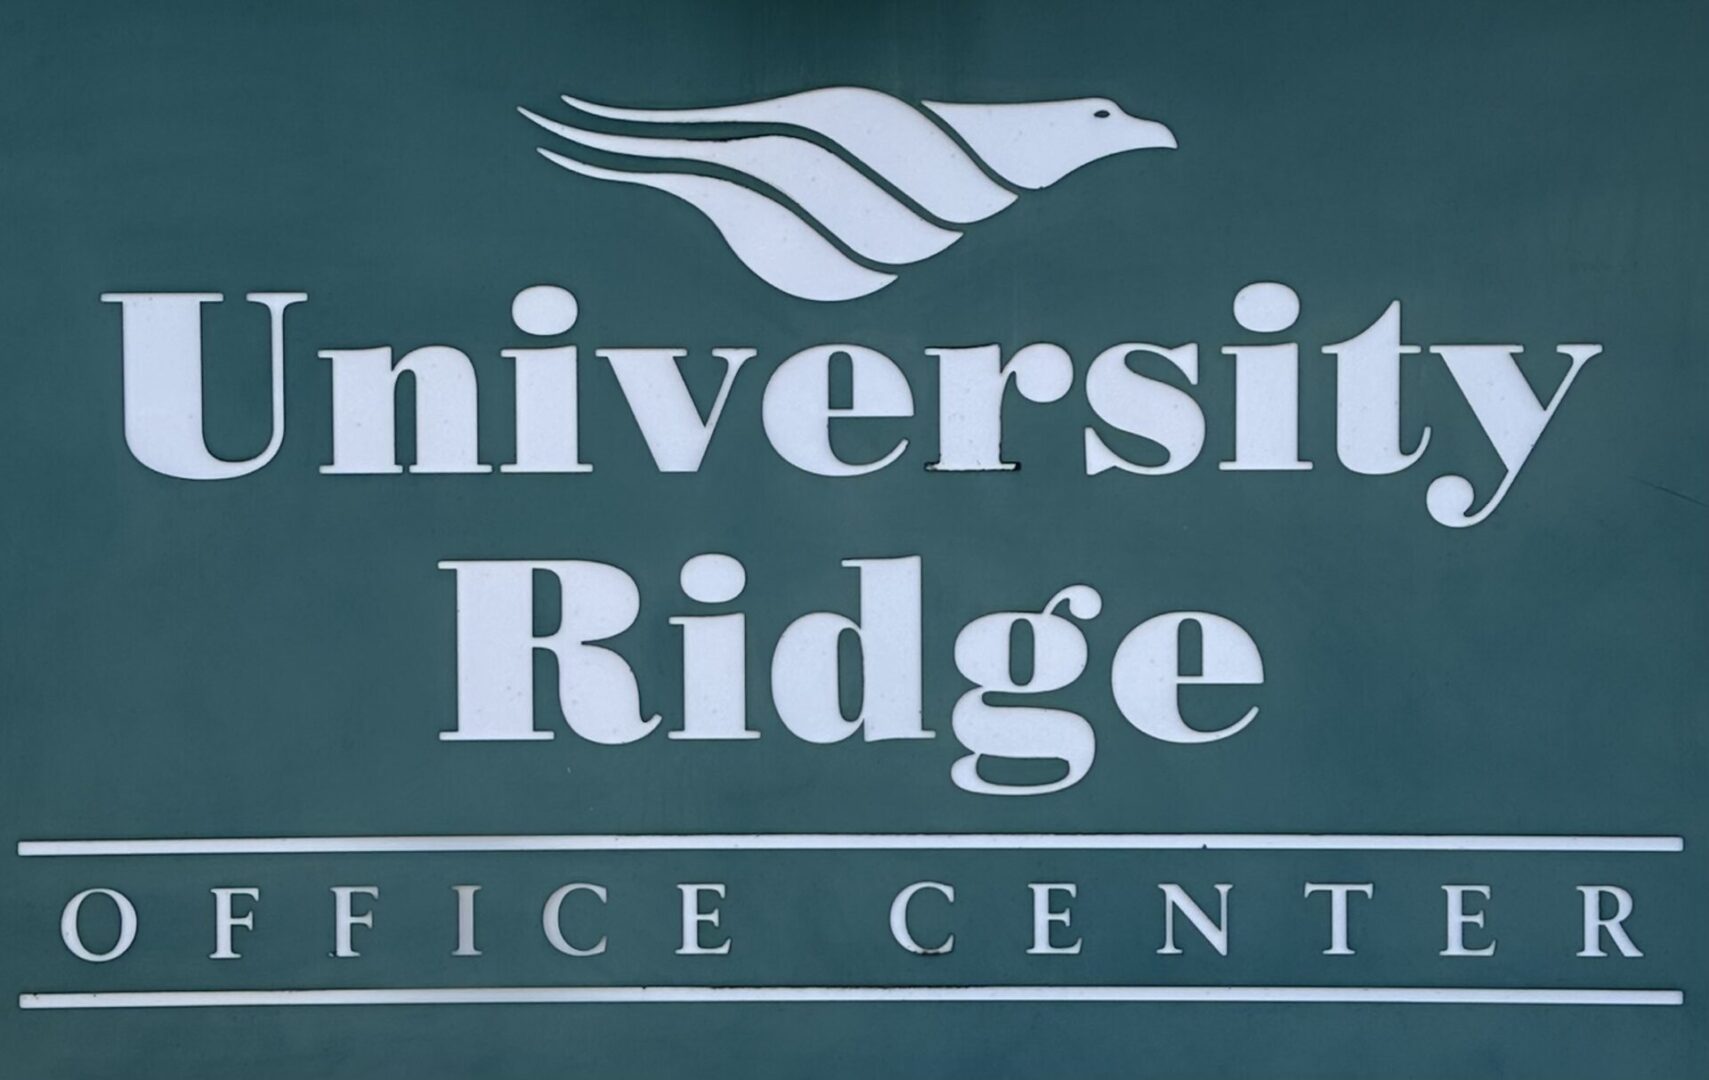 A sign for the university ridge office center.